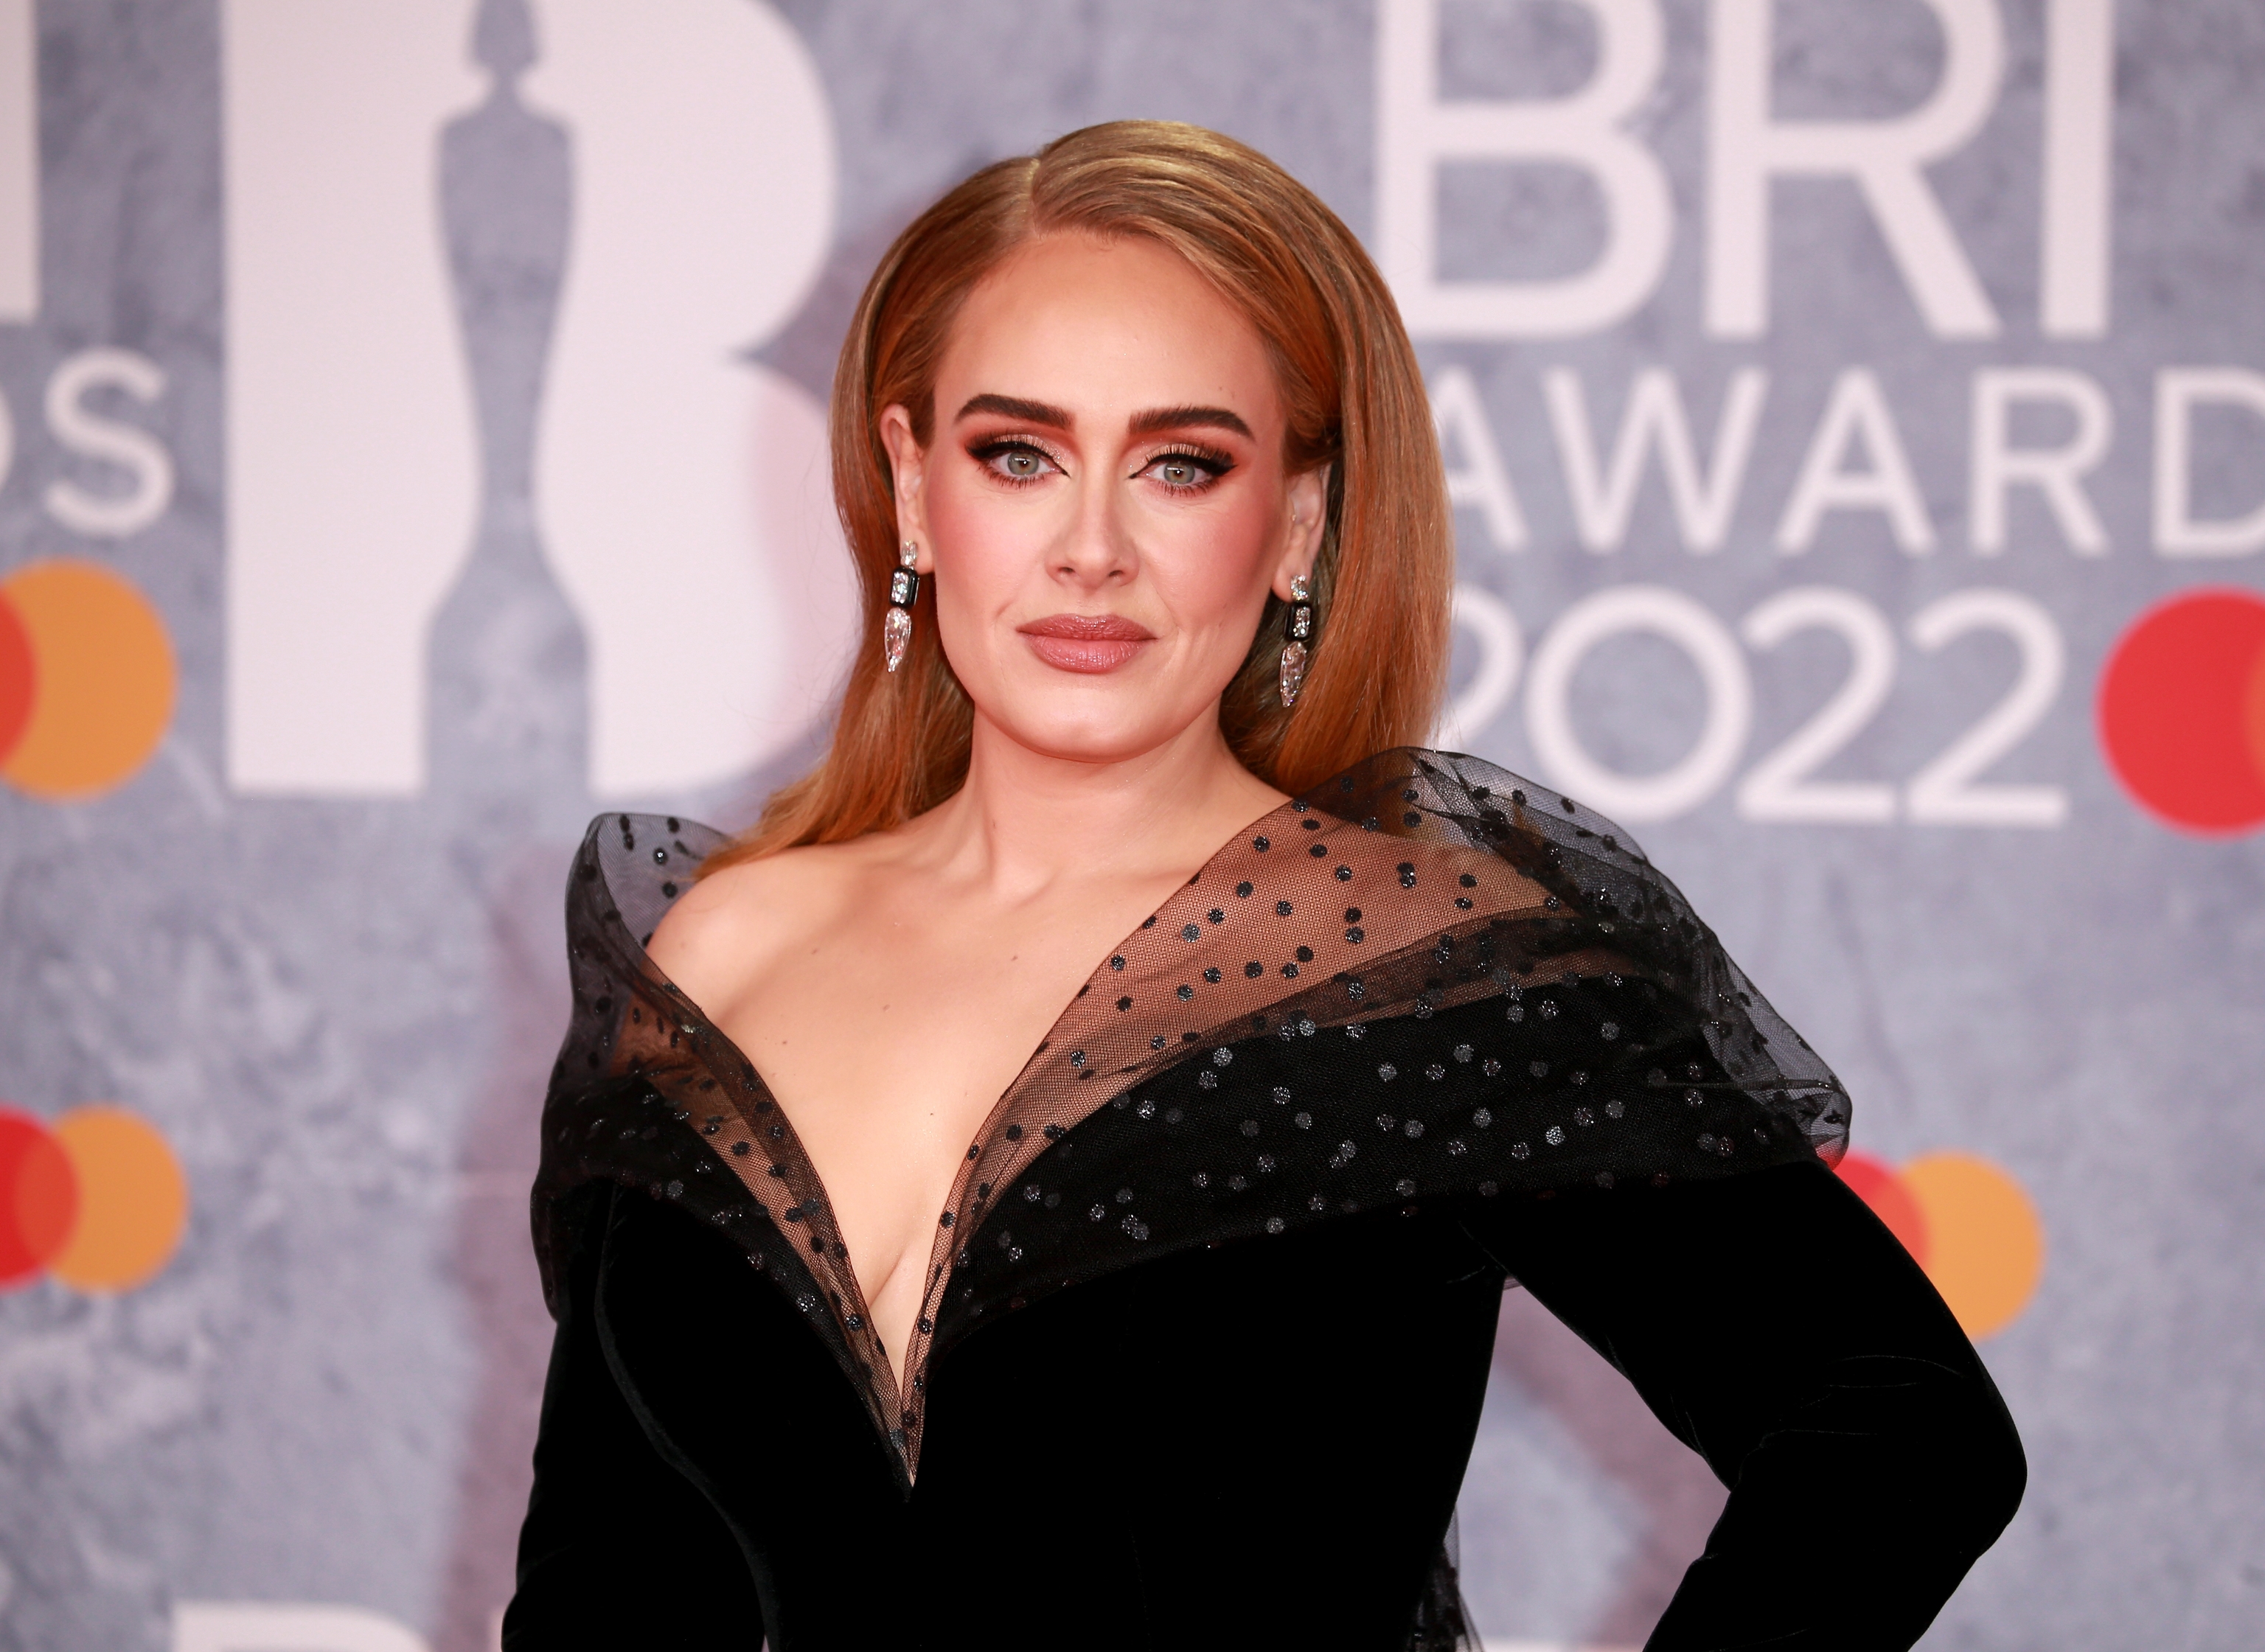 Adele attends the 2022 BRIT Awards in London.